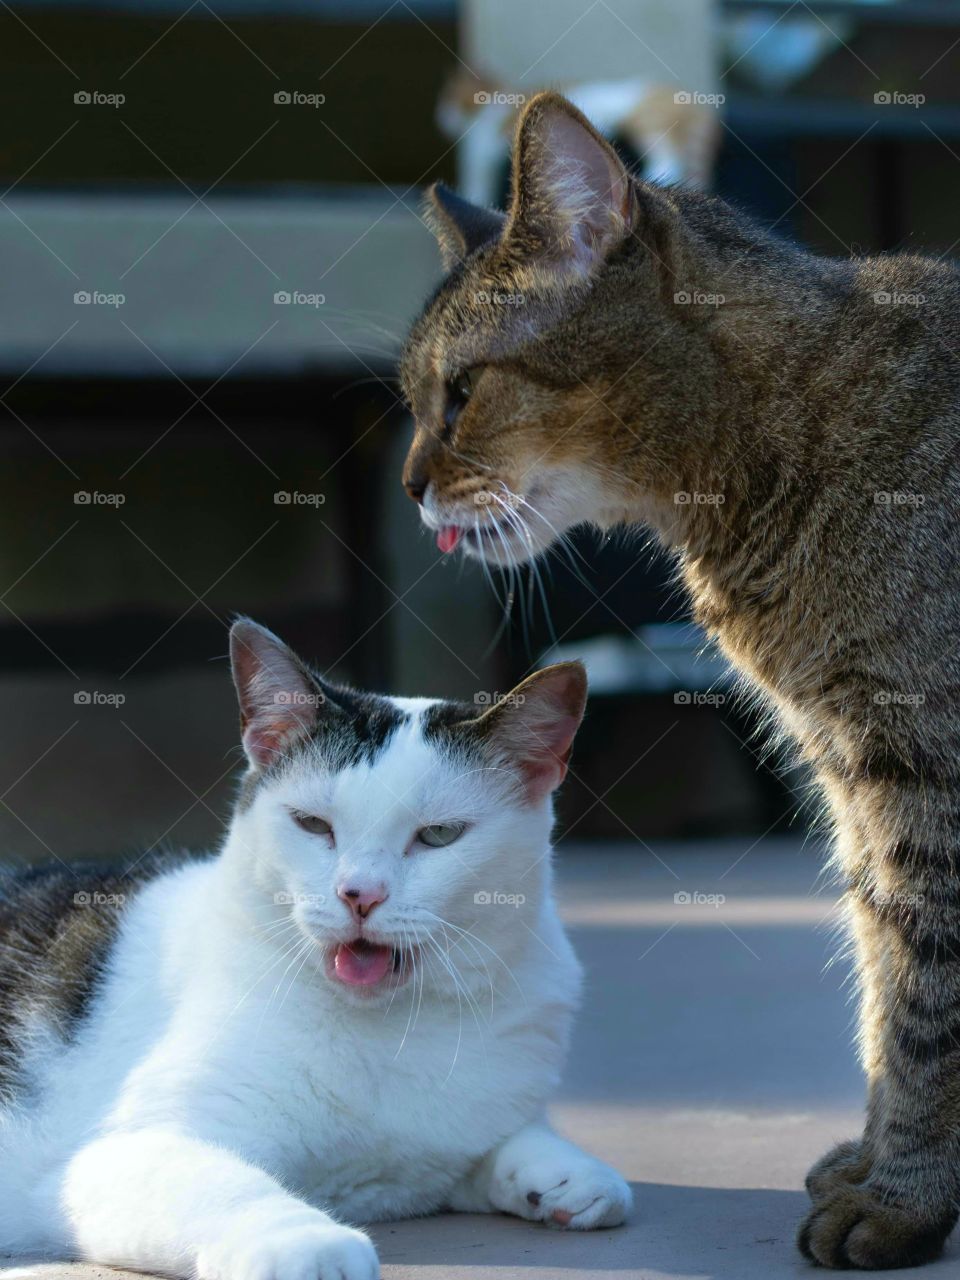 brown cat with tongue sticking out standing over a white cat with squinty eyes and open mouth with tongue out